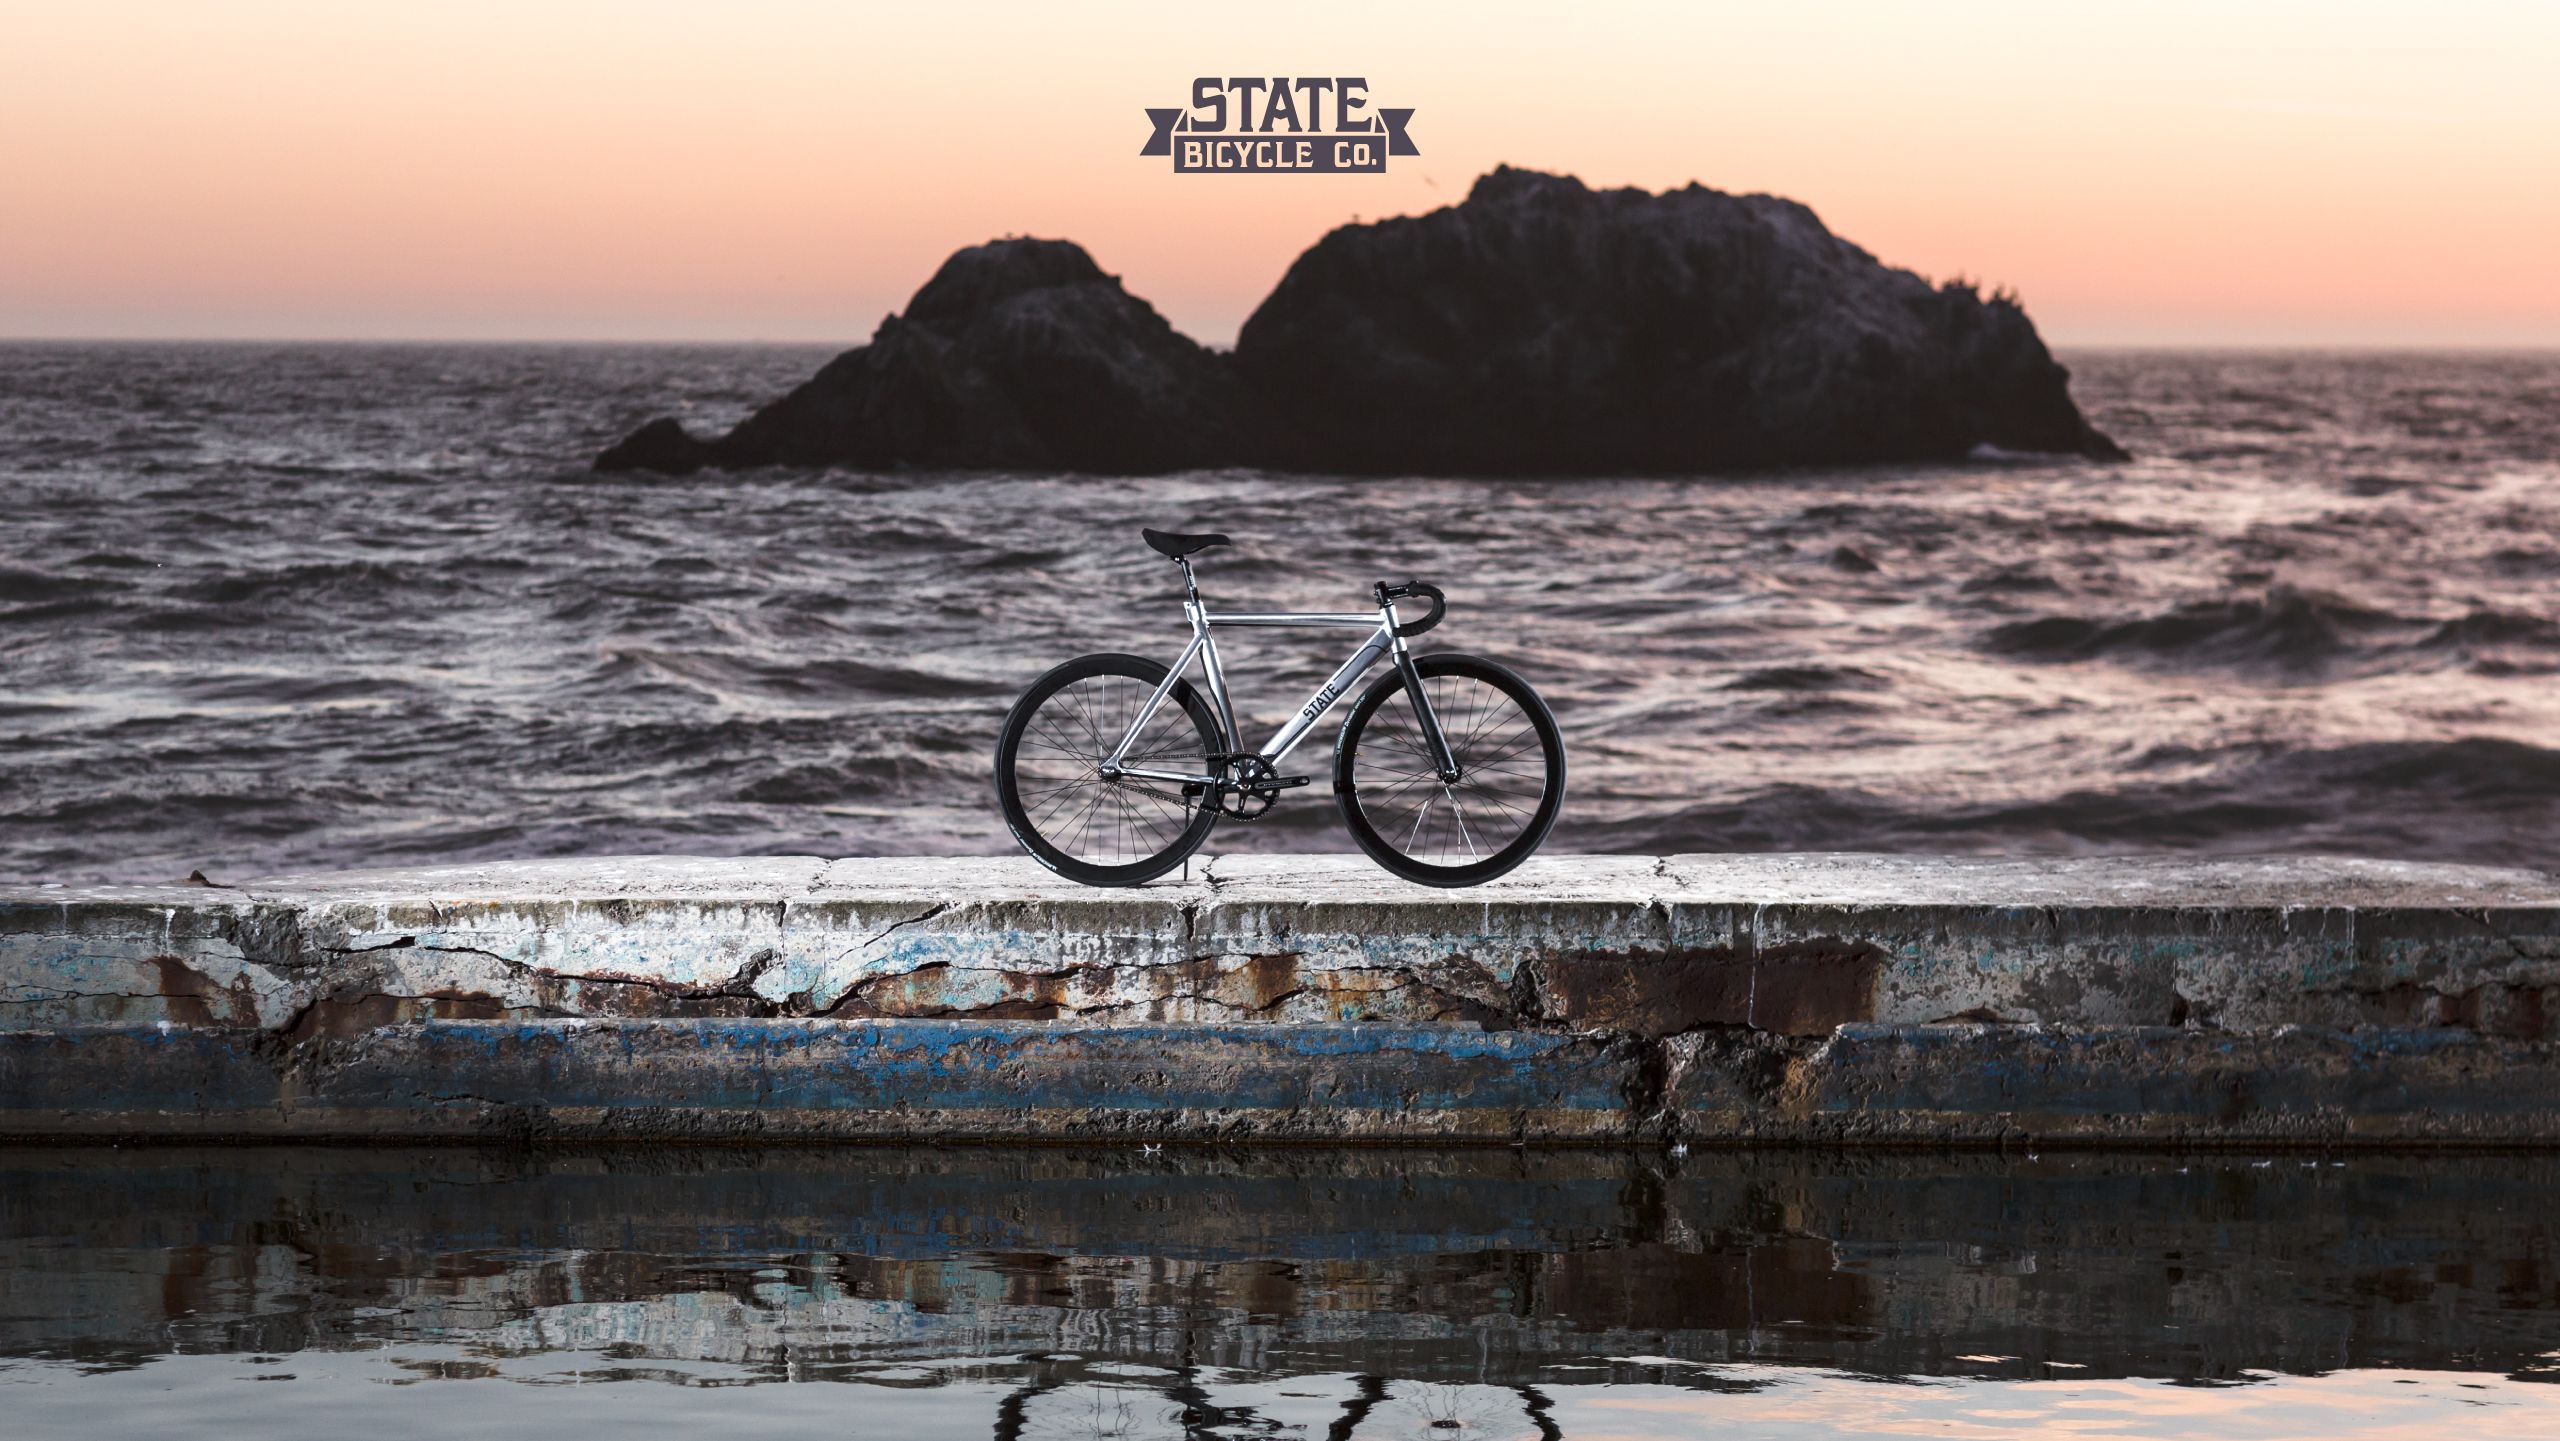 Monthly Wallpaper – August 2014 | State Bicycle Co.